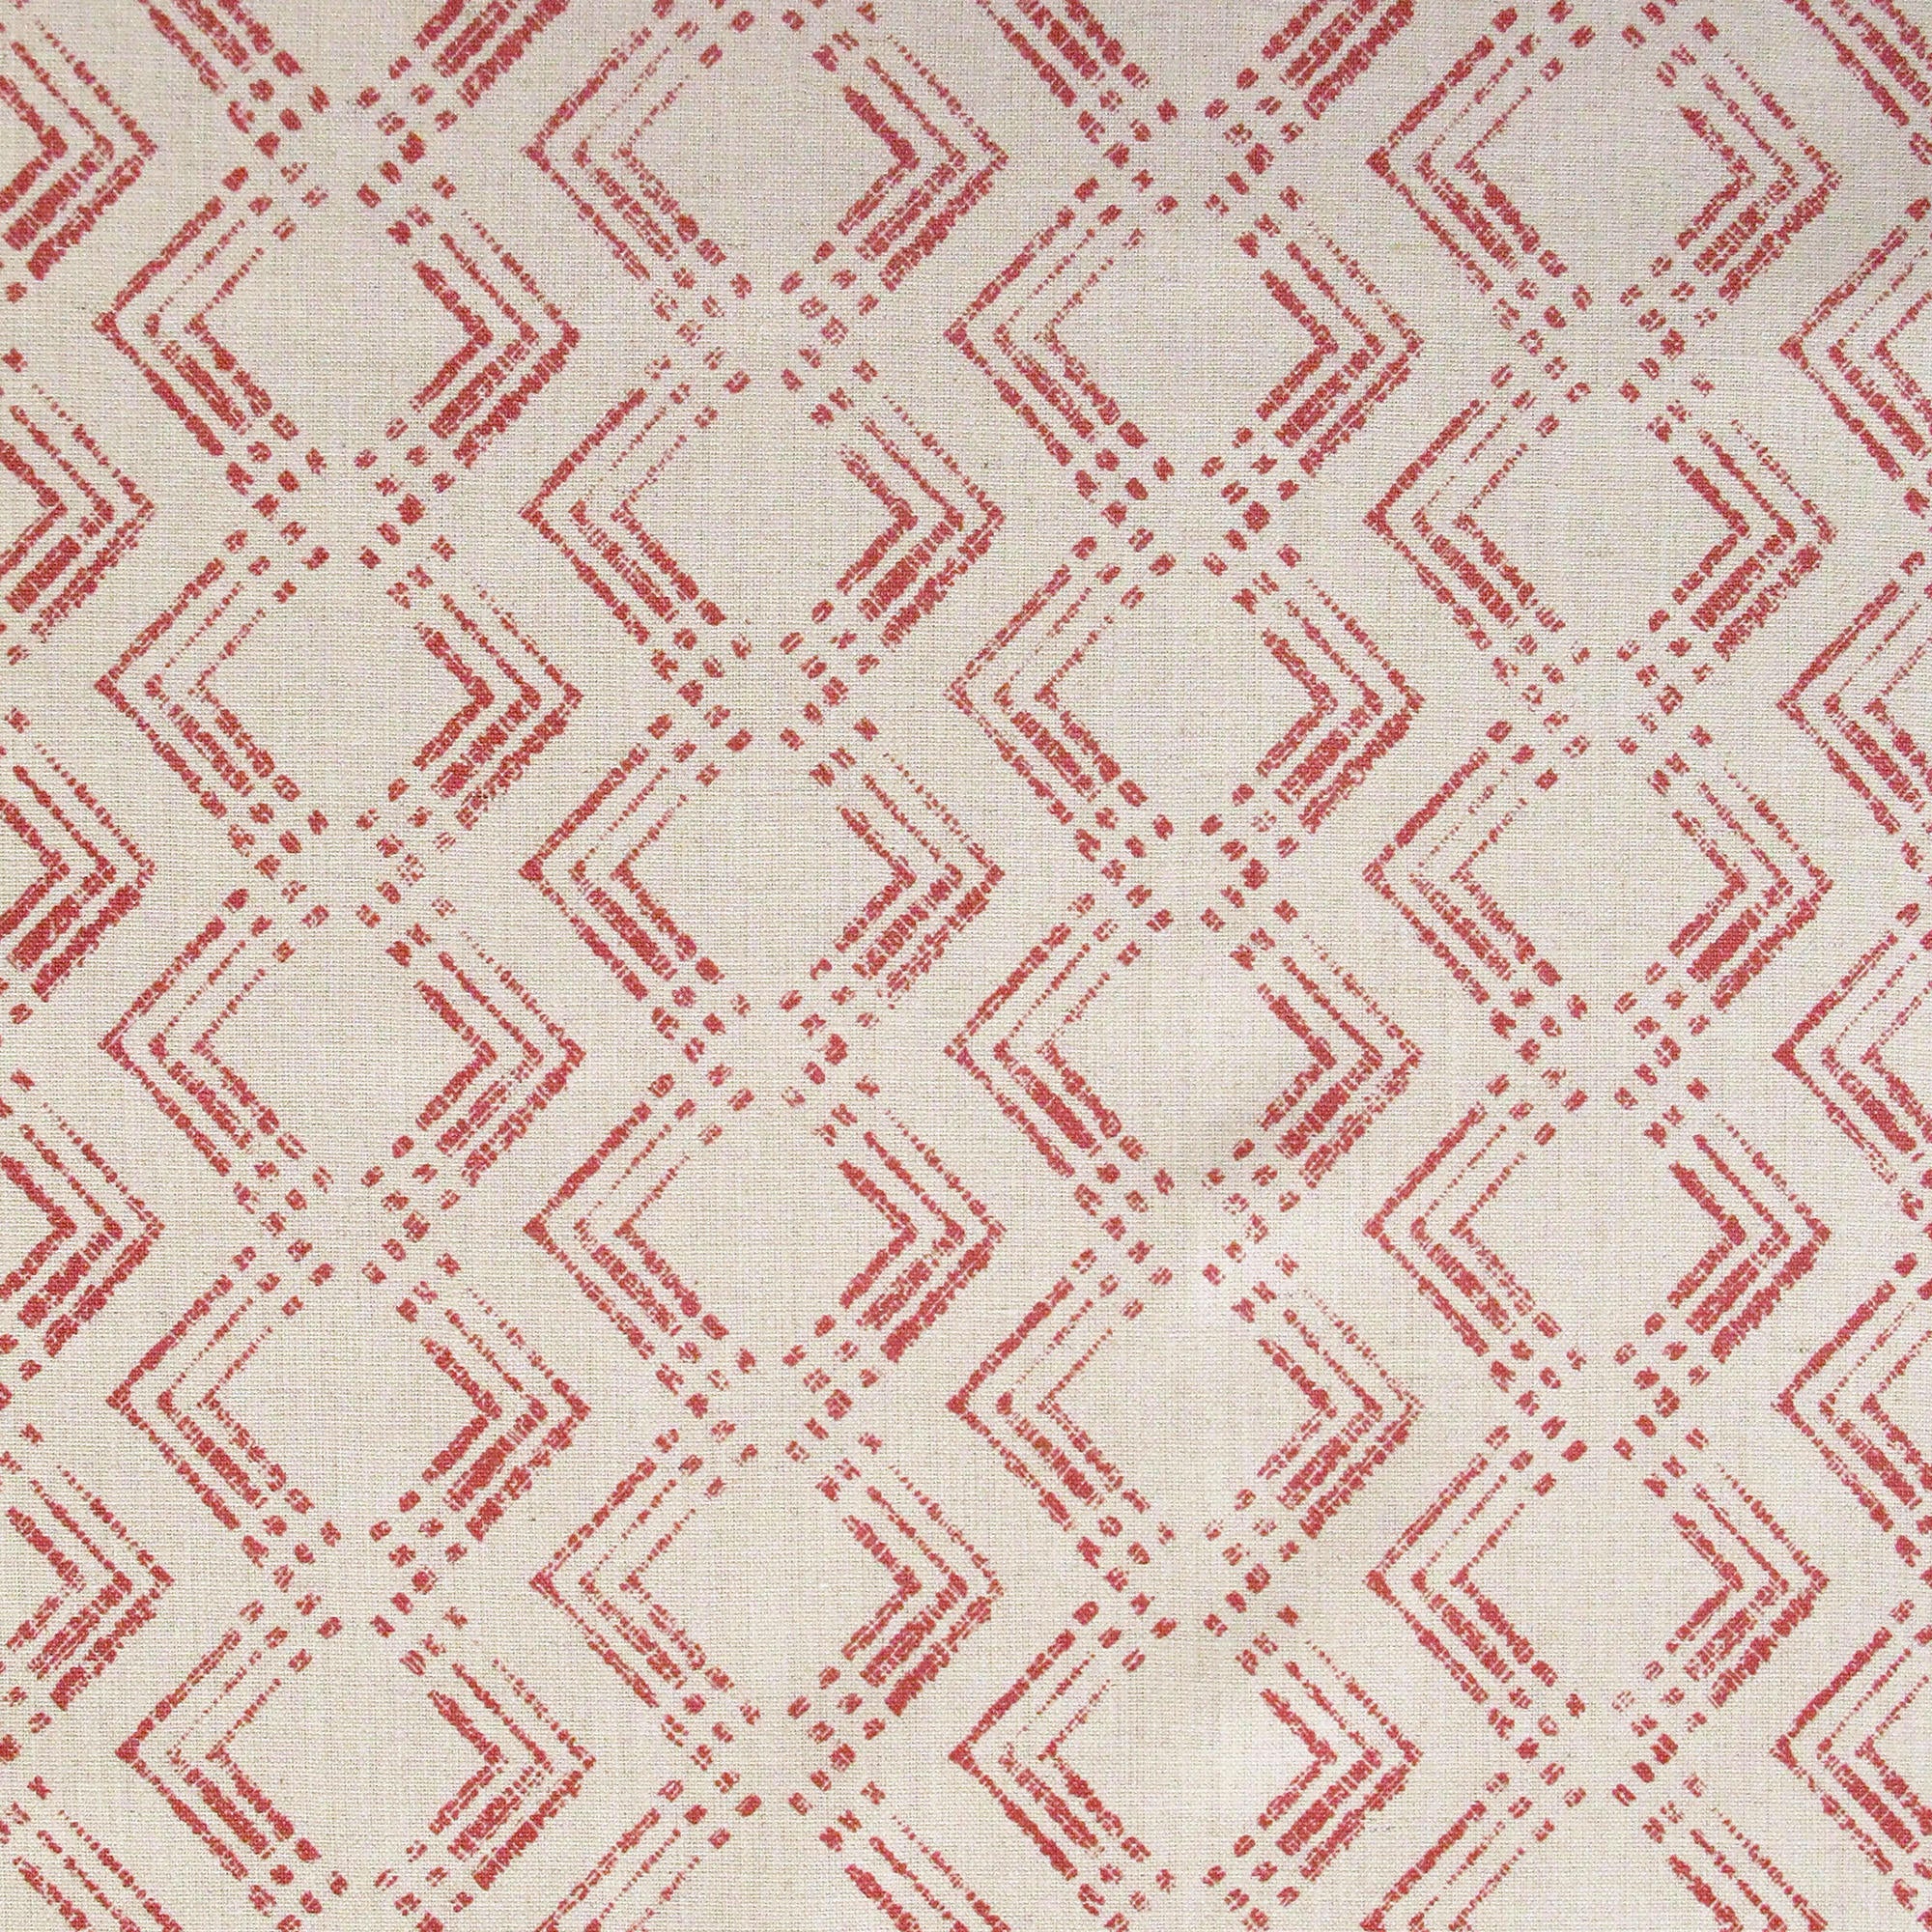 Fabric in a diamond grid pattern in coral on a tan field.